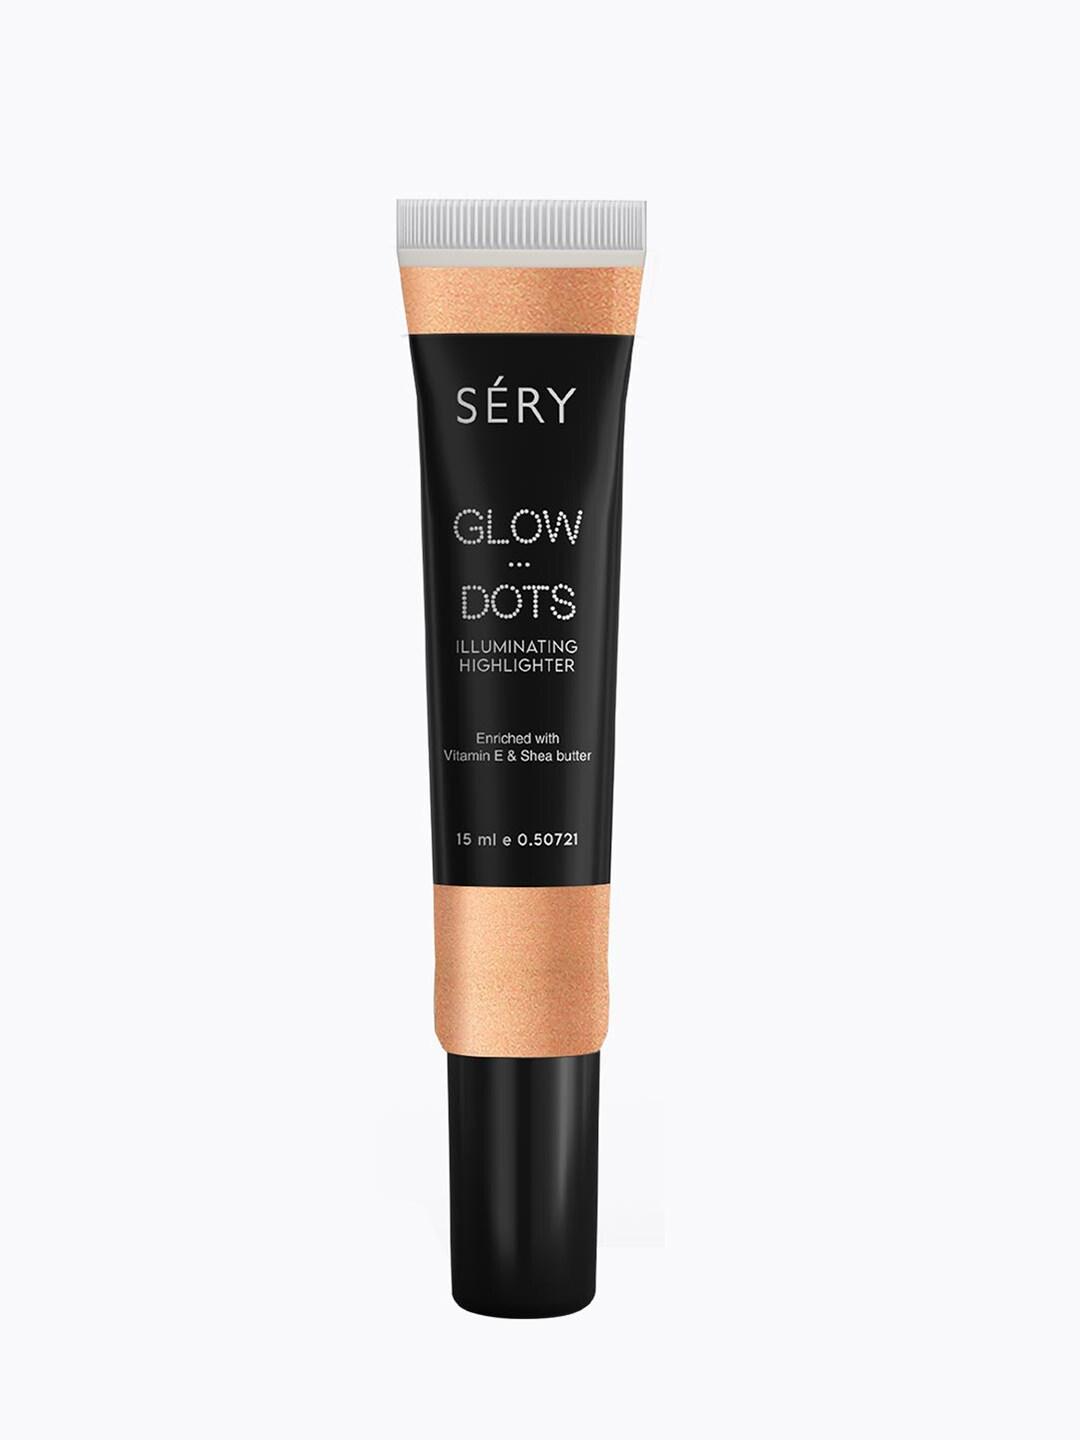 sery-glow-dots-smudge-proof-illuminating-highlighter-with-vitamin-e-15ml---champagne